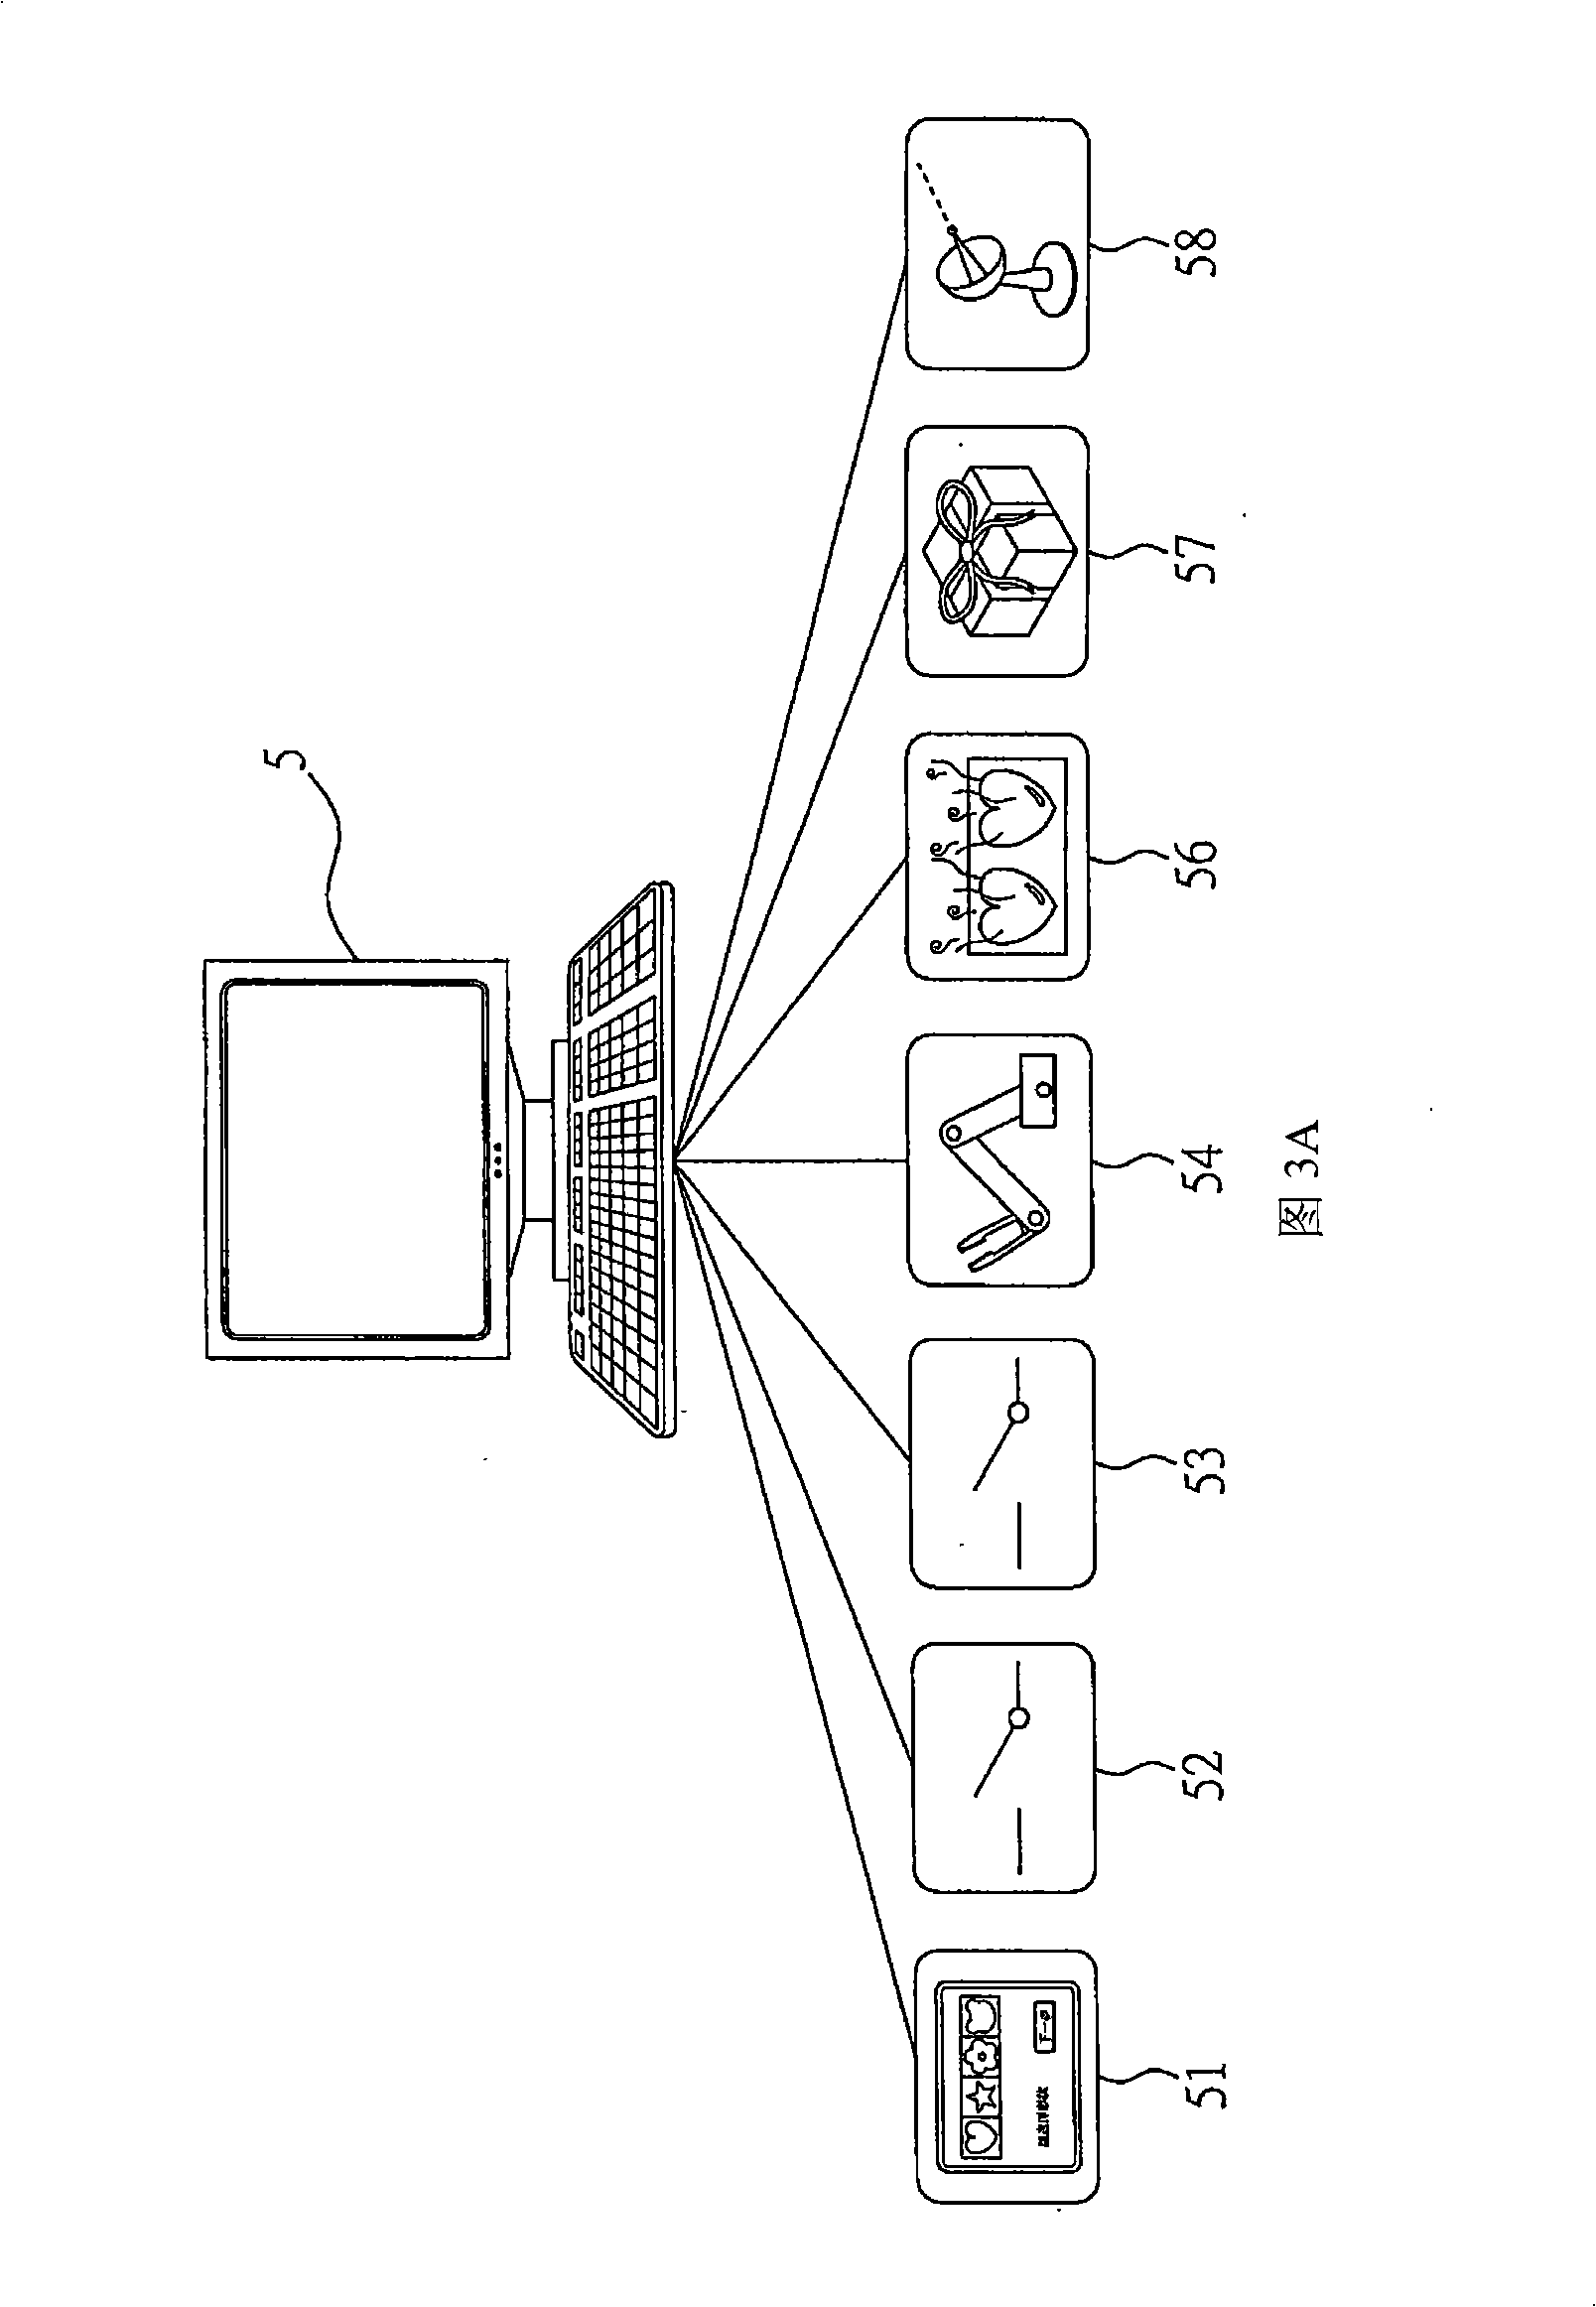 Food forming device and foods producing system having the device